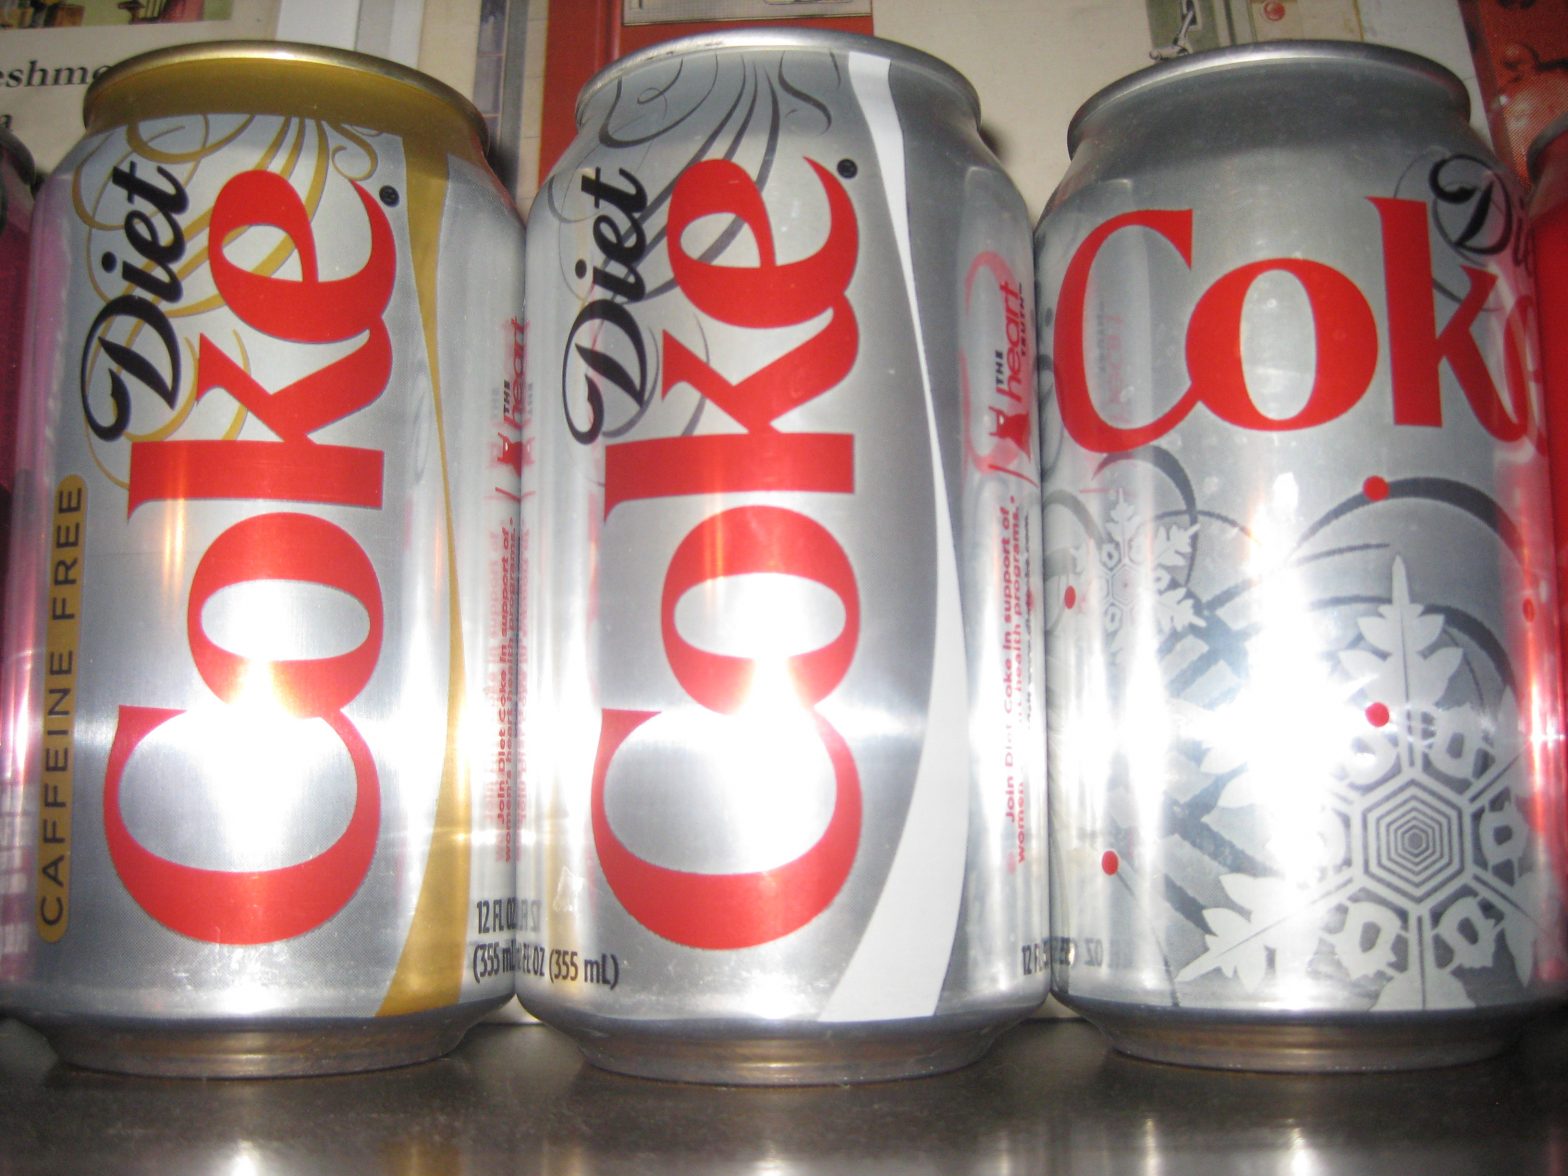 Aspartame foods and products: Complete list